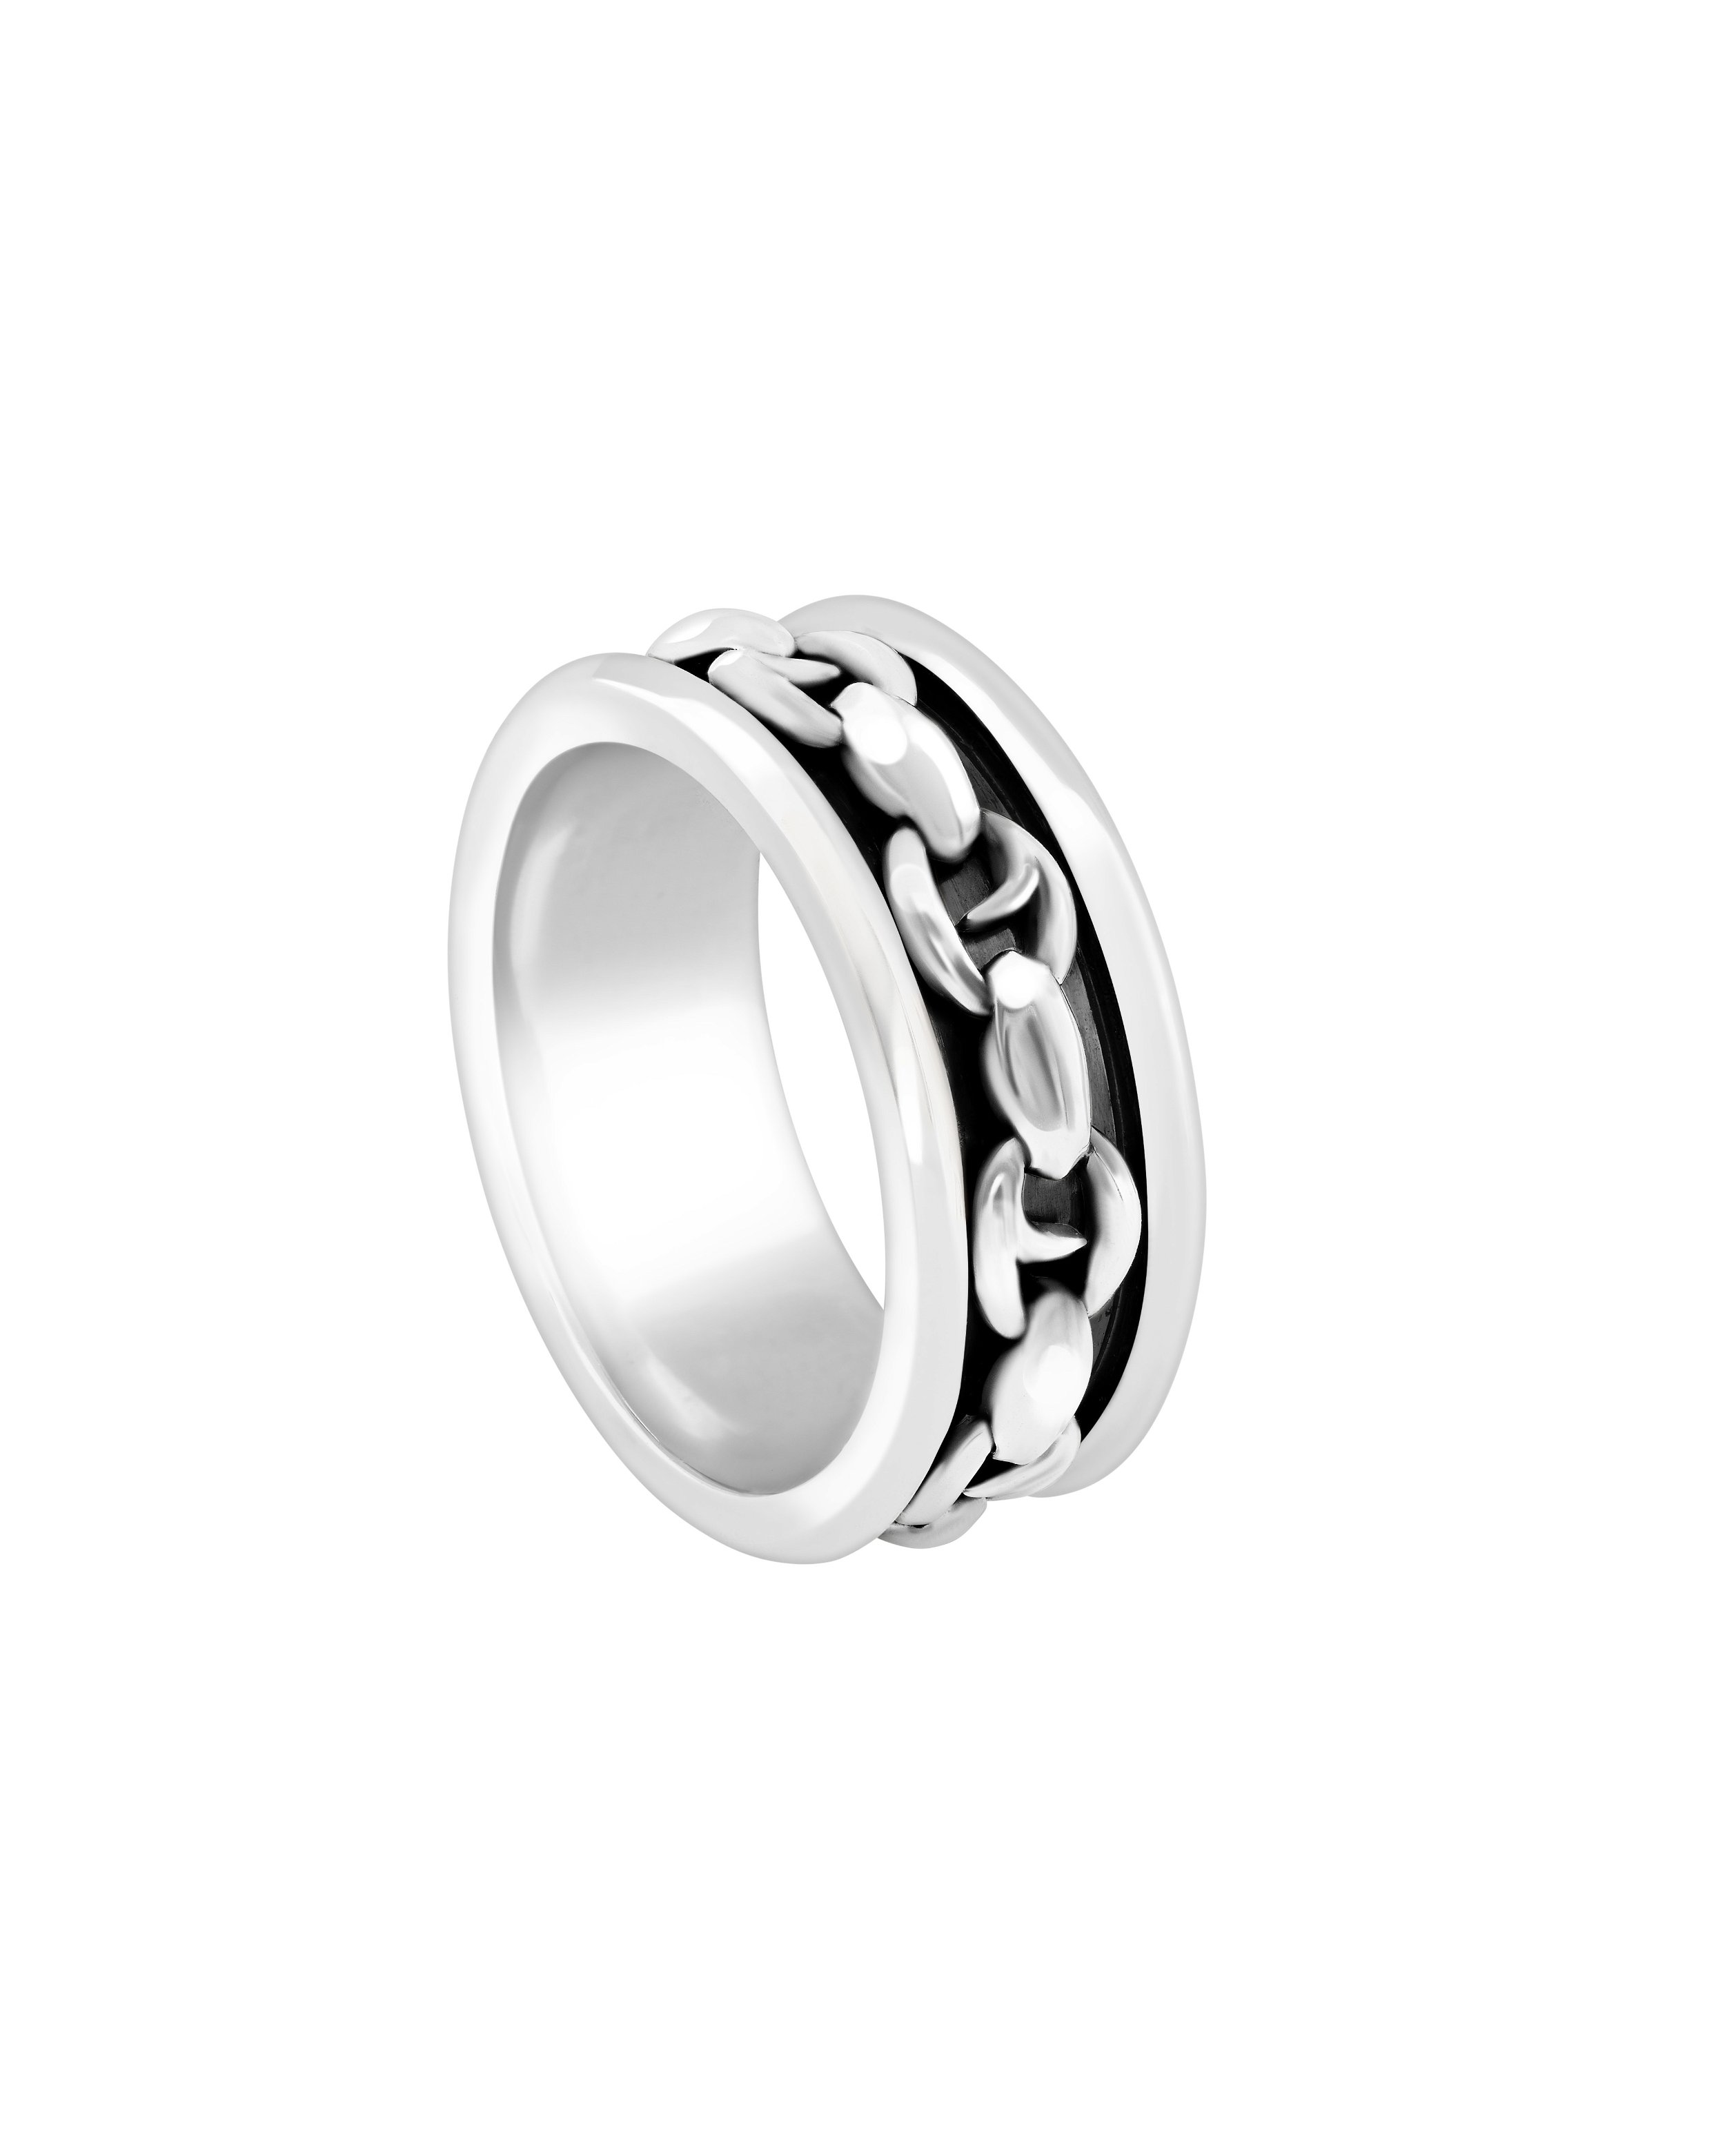 Thorn Addiction Classic Link Spinning Band Ring in Sterling Silver - Size 10